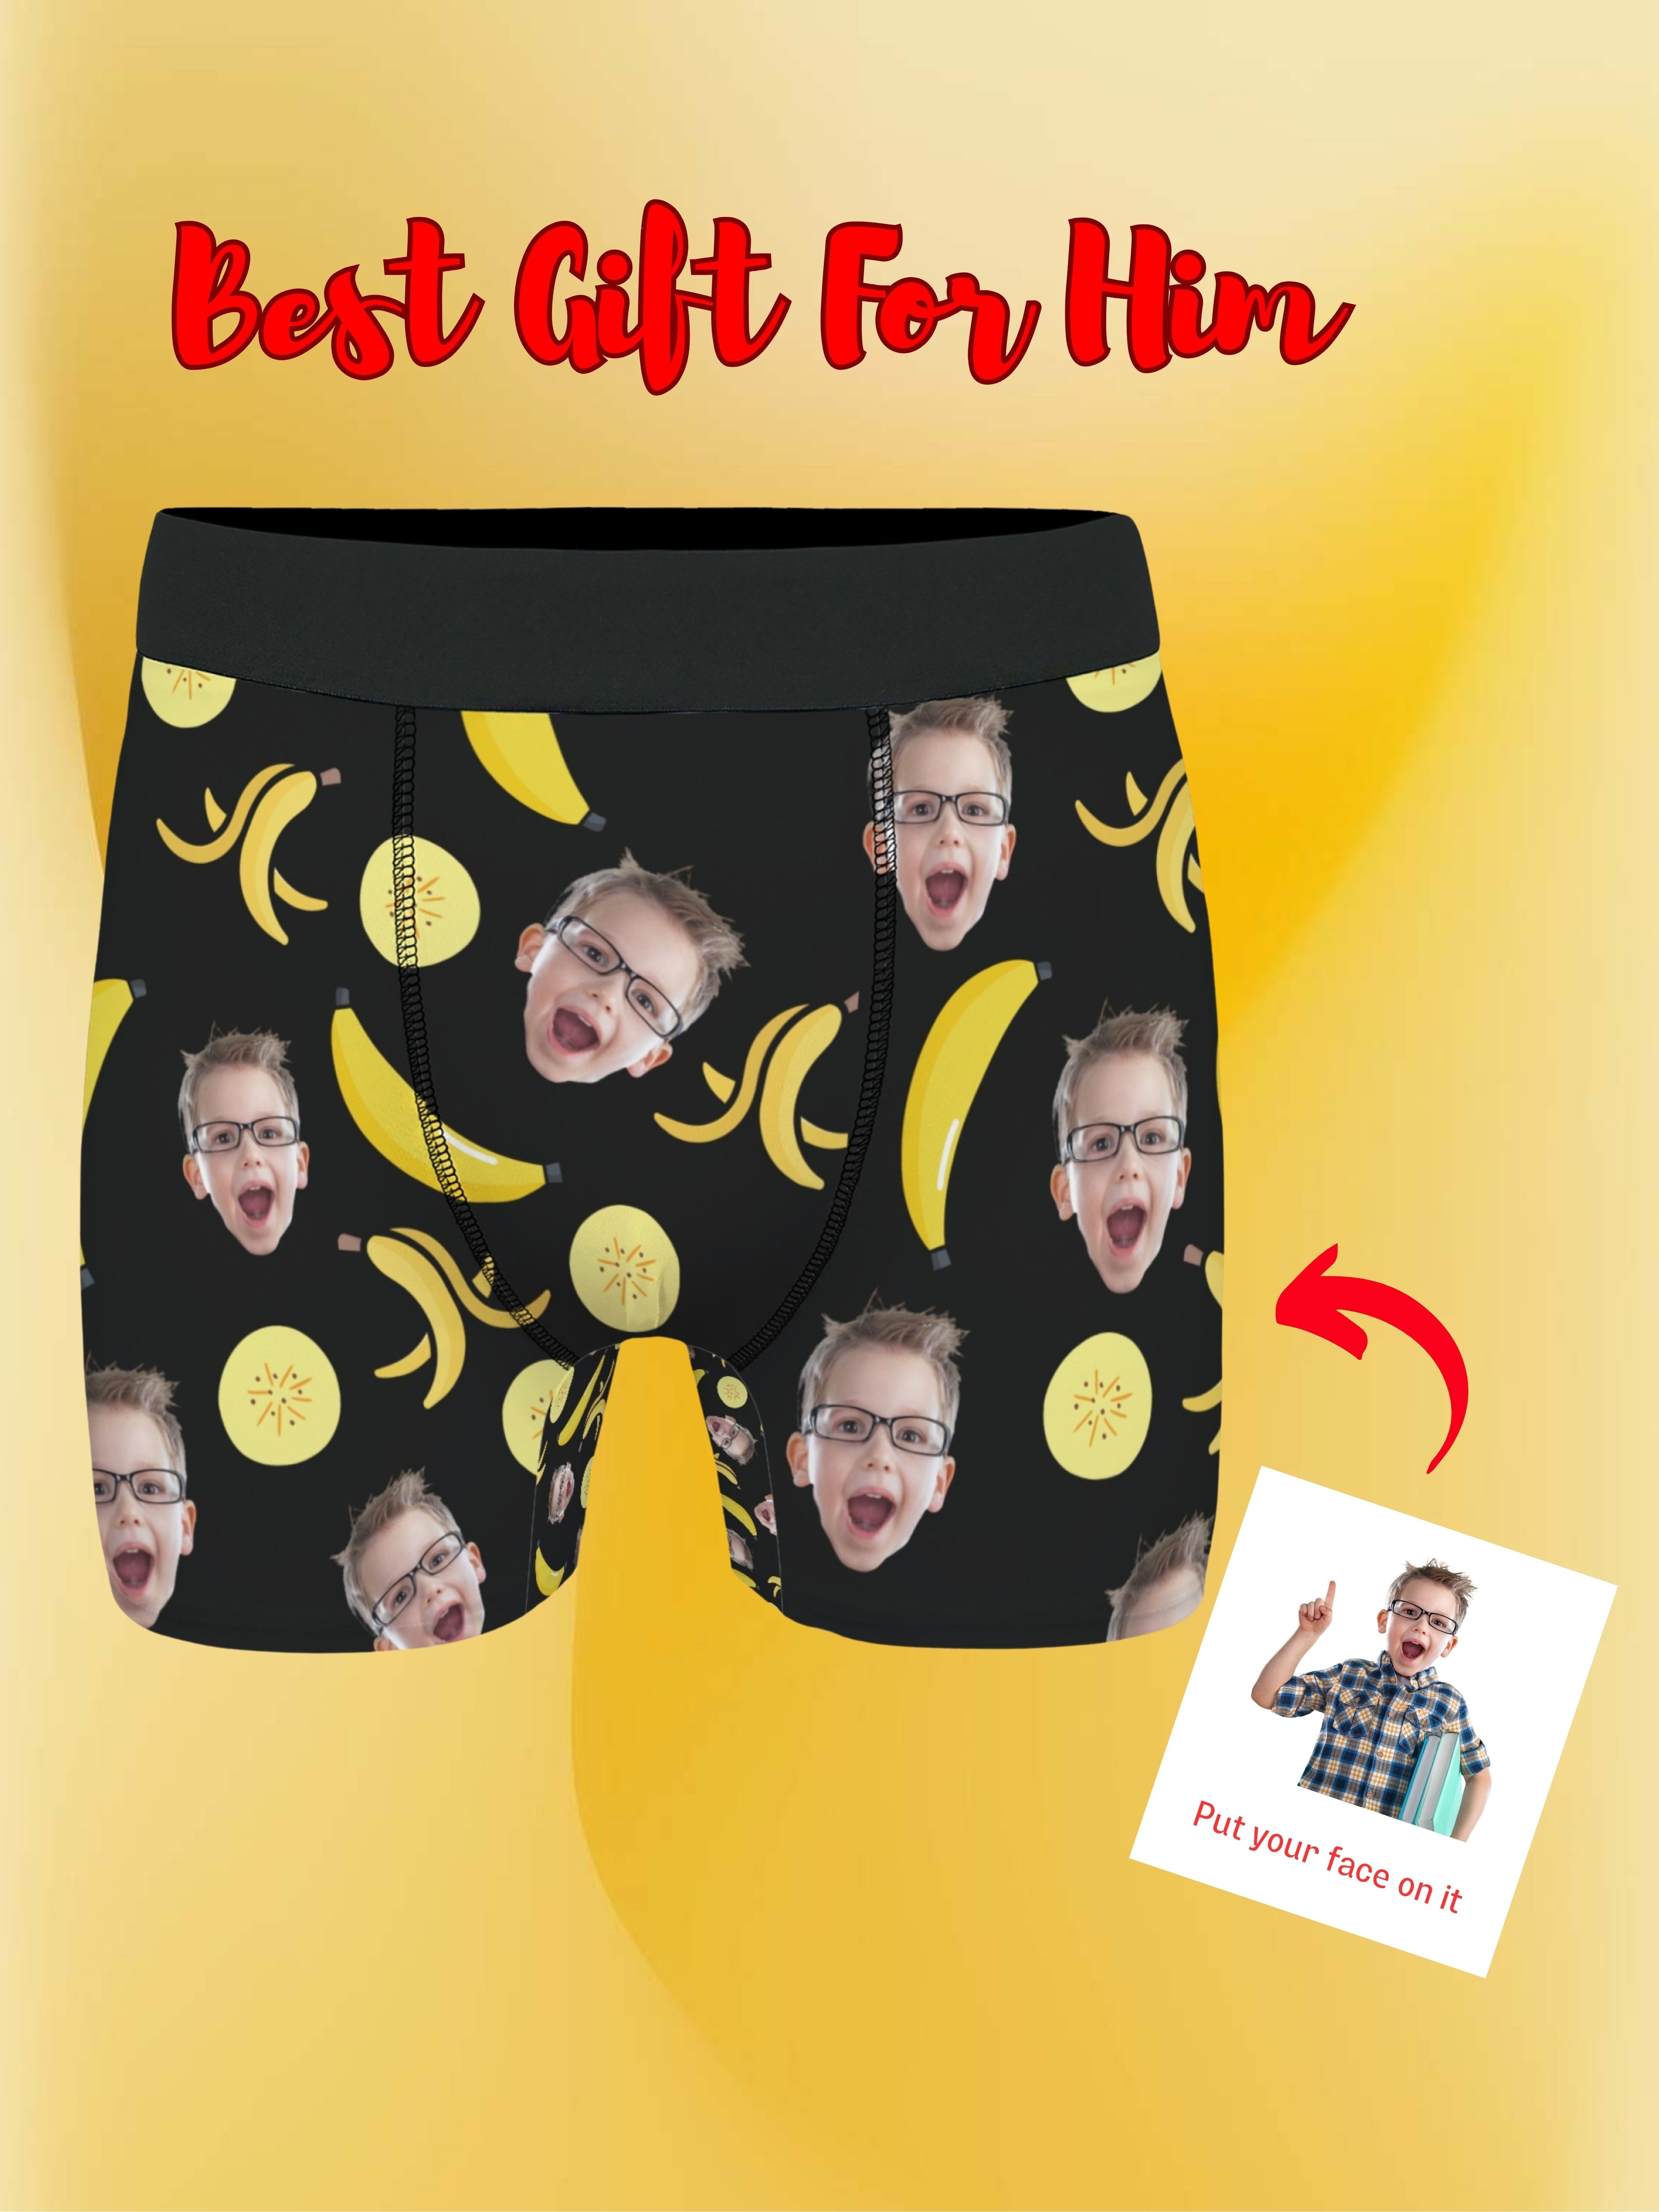 Face Boxers - Put Your Face on Boxers